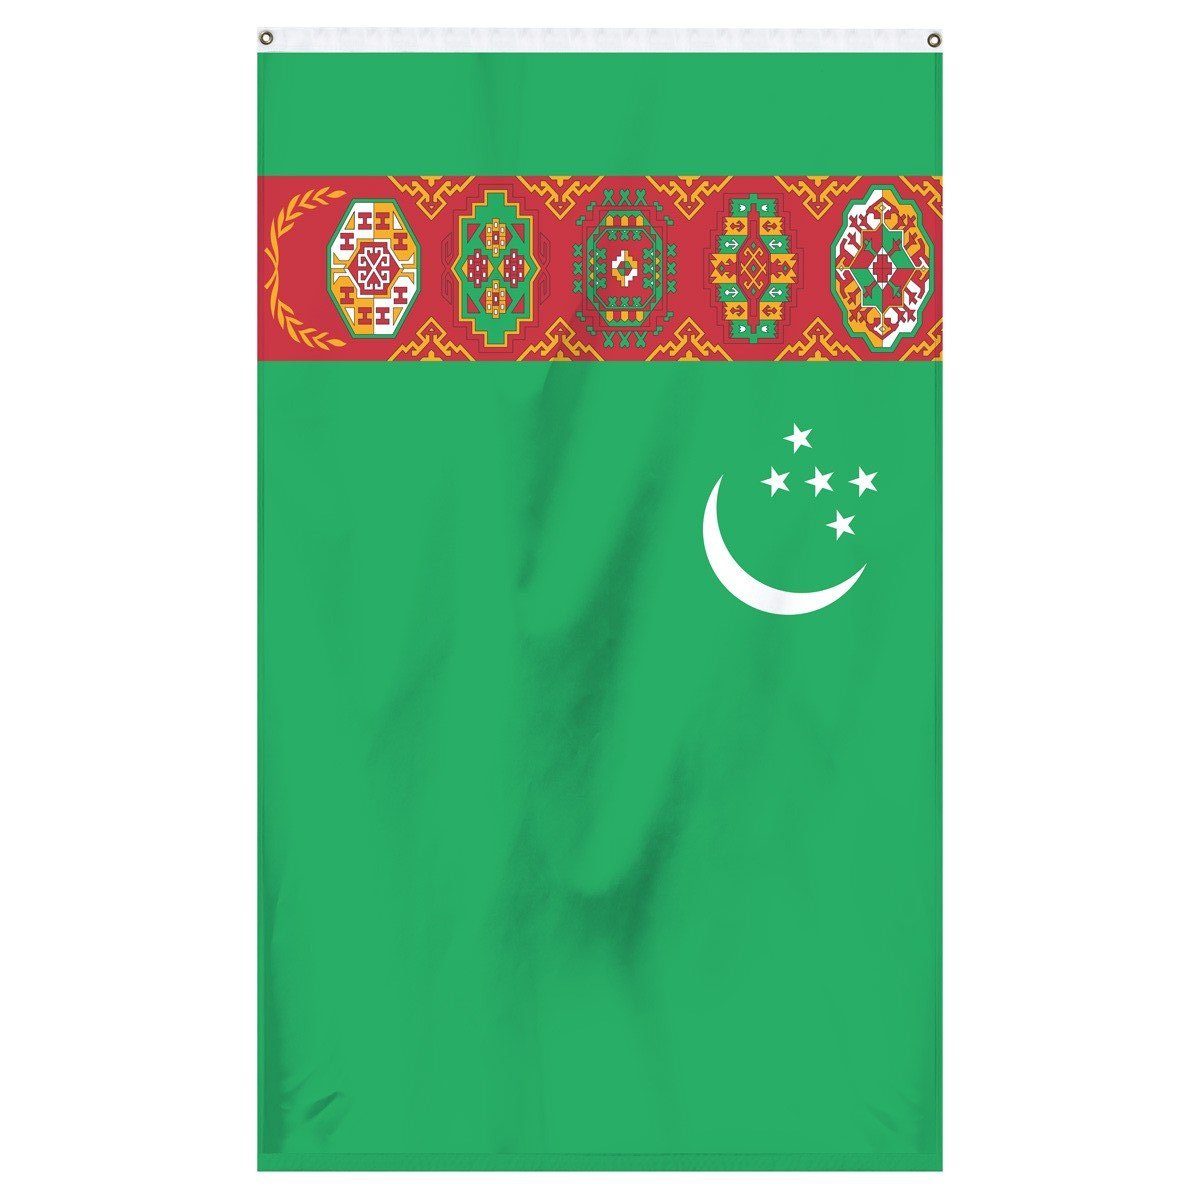 Turkmenistan National Flag for sale to buy online from Atlantic Flag and Pole. Green flag with a white crescent moon and 5 white stars with a patch or multicolored tribal images.